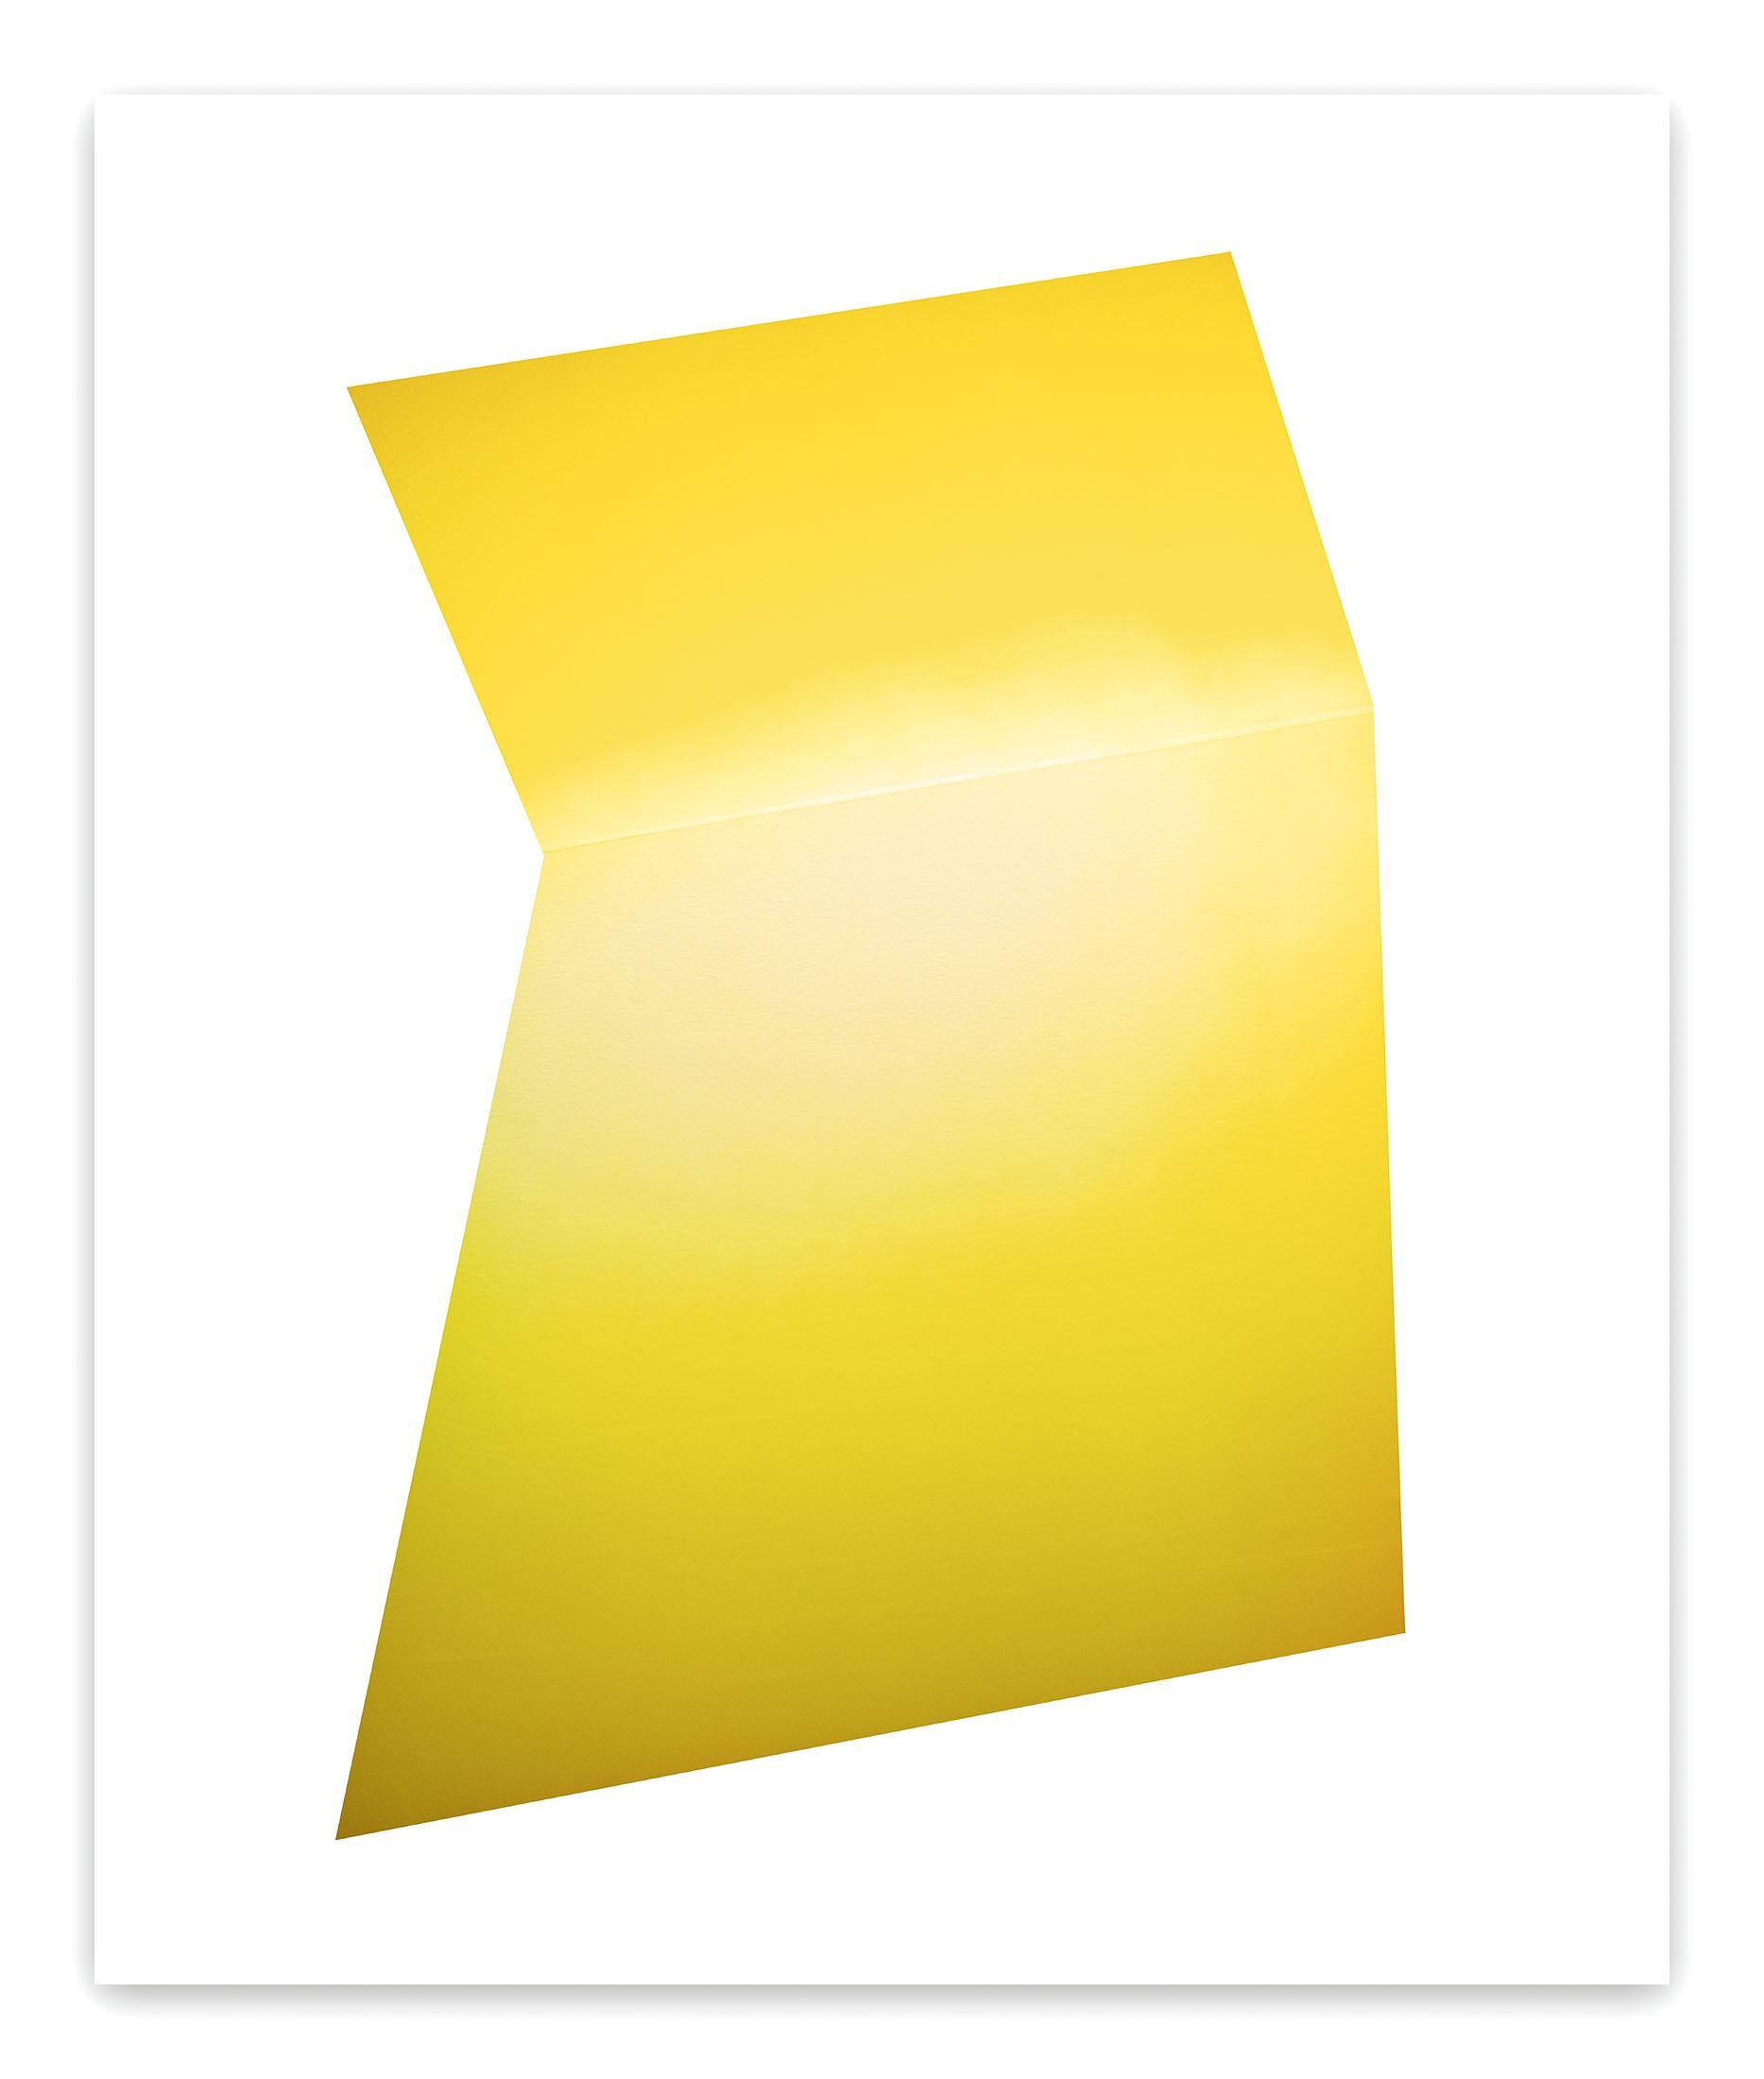 Color Kinesthesia 5B39 Yellow (Abstract Photography) 

Photographic C Prints, printed on Canson Platinè fiber Rag 310g - Unframed

"Edition of 3 + 2Ap  Turnaround time 2-3 weeks, printed on demand.

This artwork will be shipped rolled in a